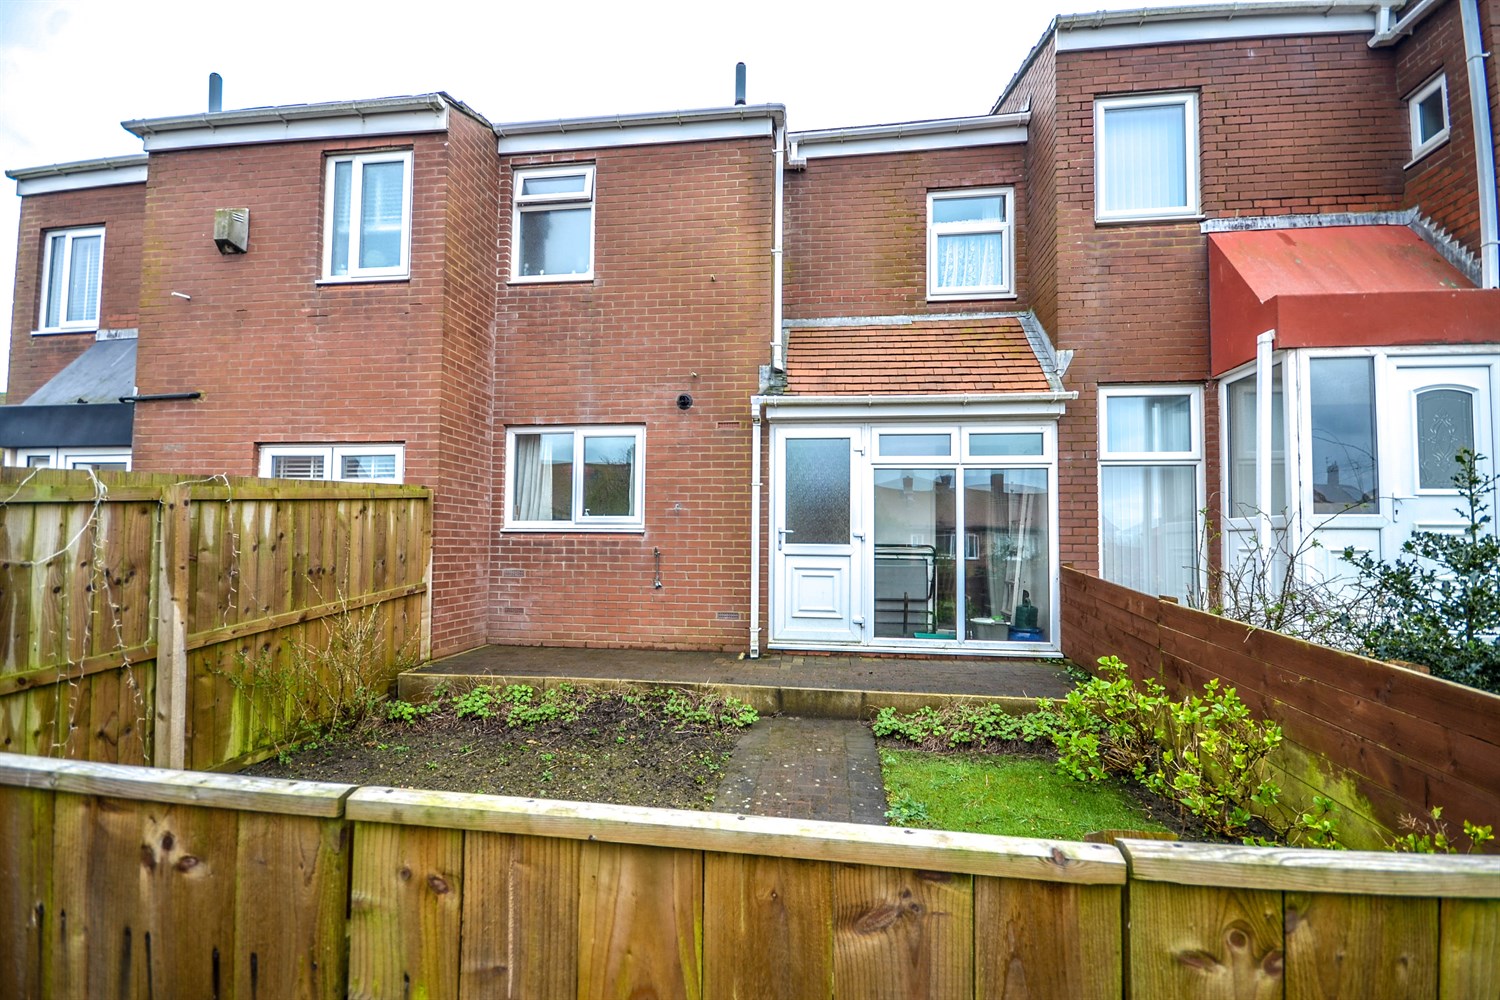 2 bed house for sale in Chatton Avenue, South Shields - Property Image 1